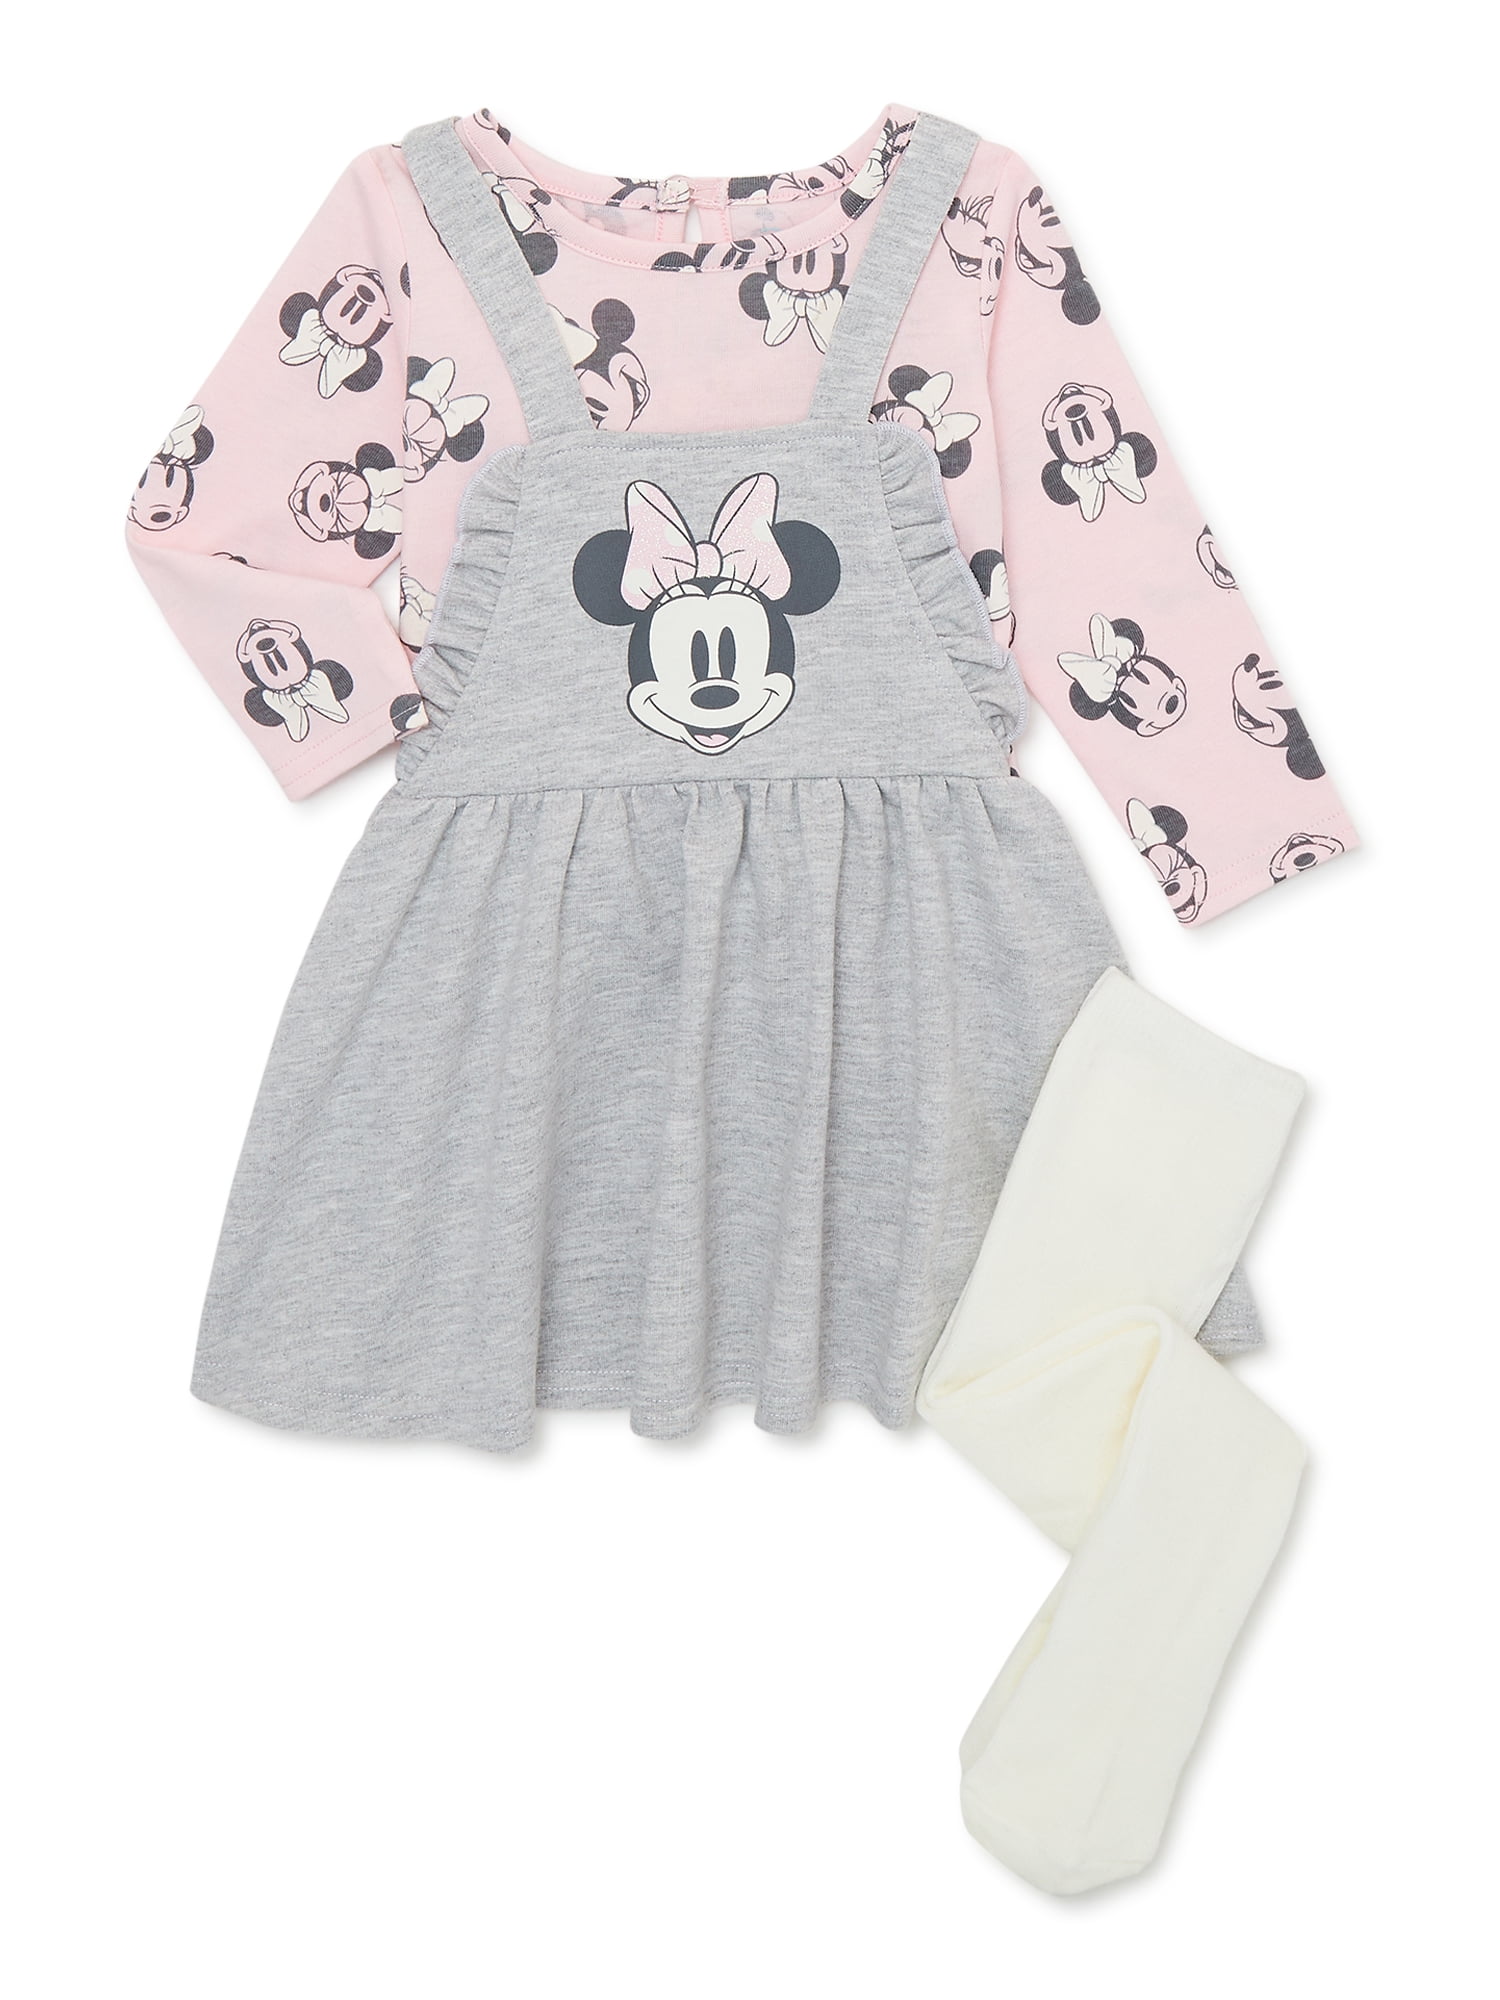 Disney Minnie Mouse Baby Girls Pinafore Dress, Top with Long Sleeves and Tights Set, 3-Piece, Sizes 0/3-24 Months